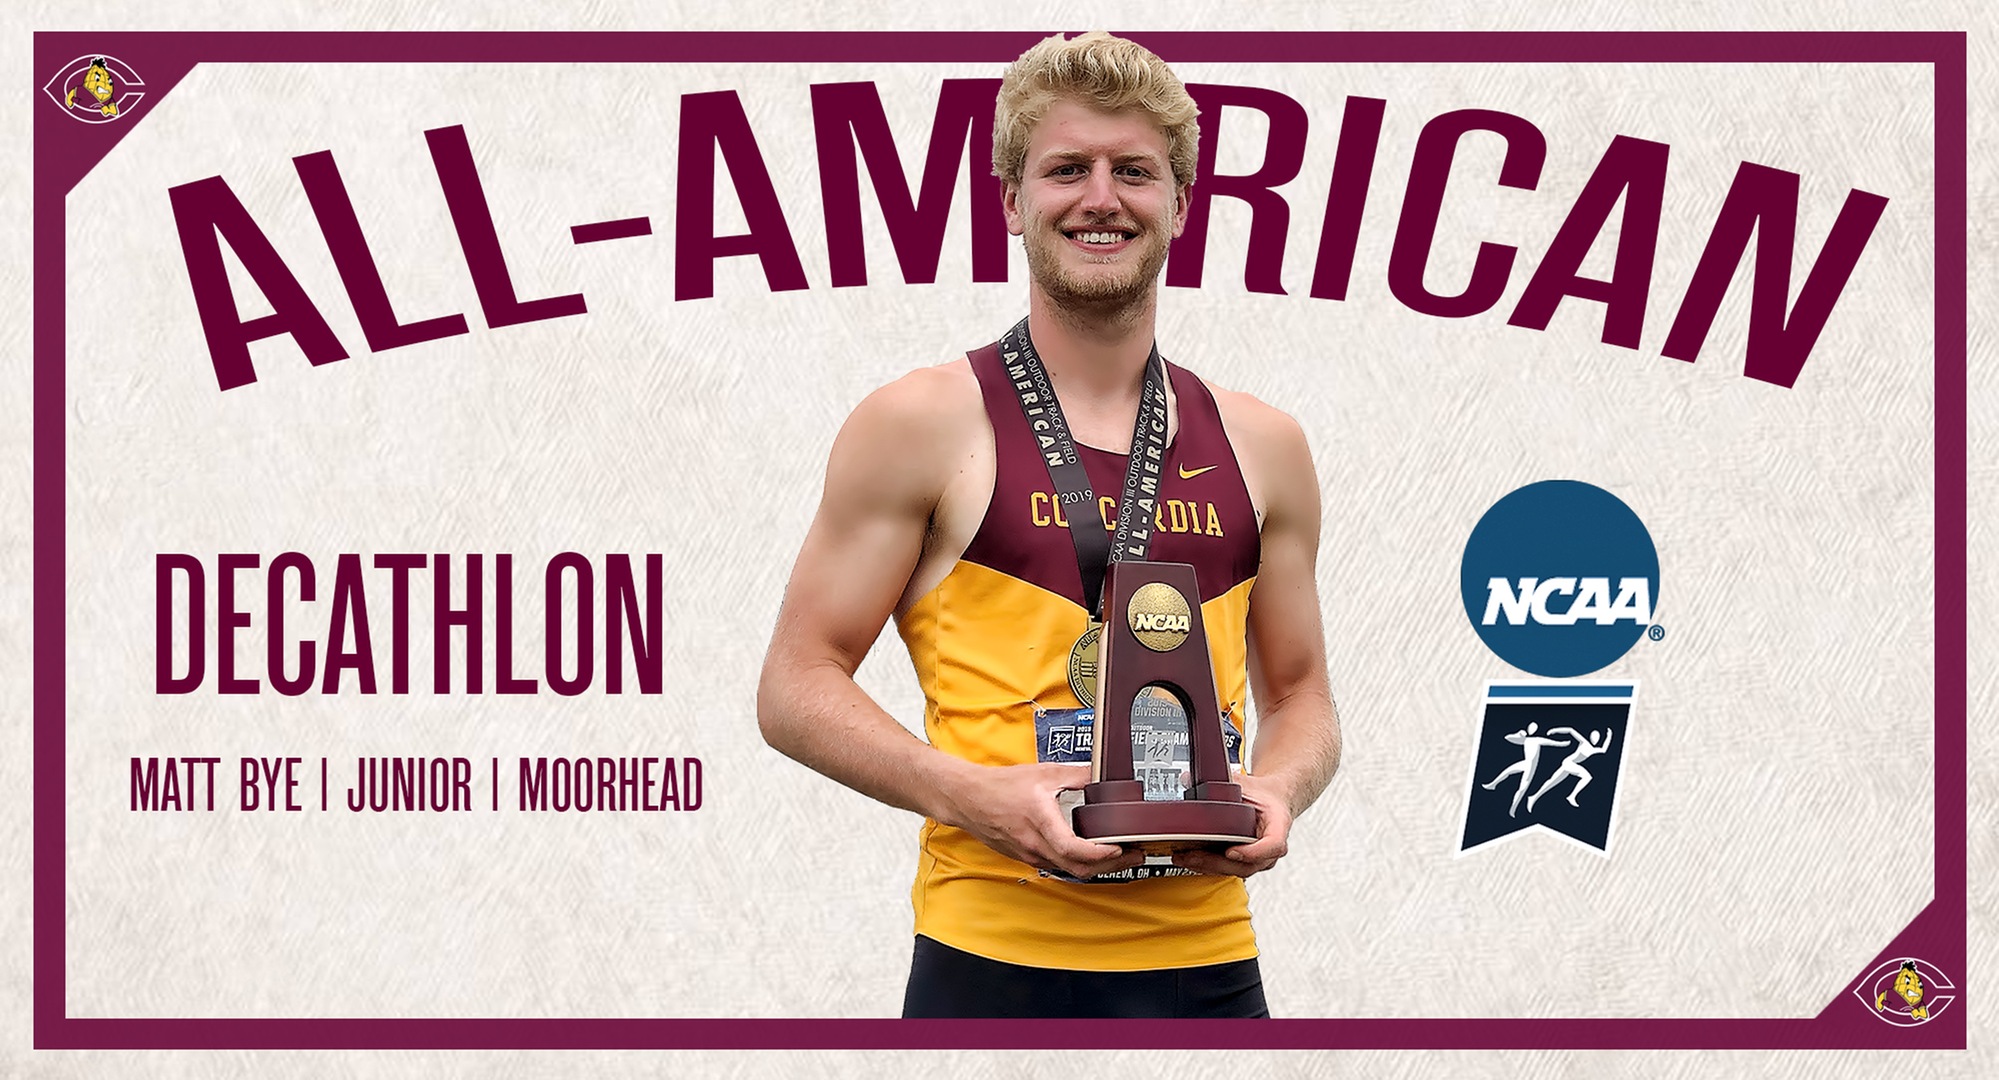 Junior Matt Bye finished eighth in the decathlon at the NCAA National Outdoor Meet to become the first Cobber All-American since 2002.